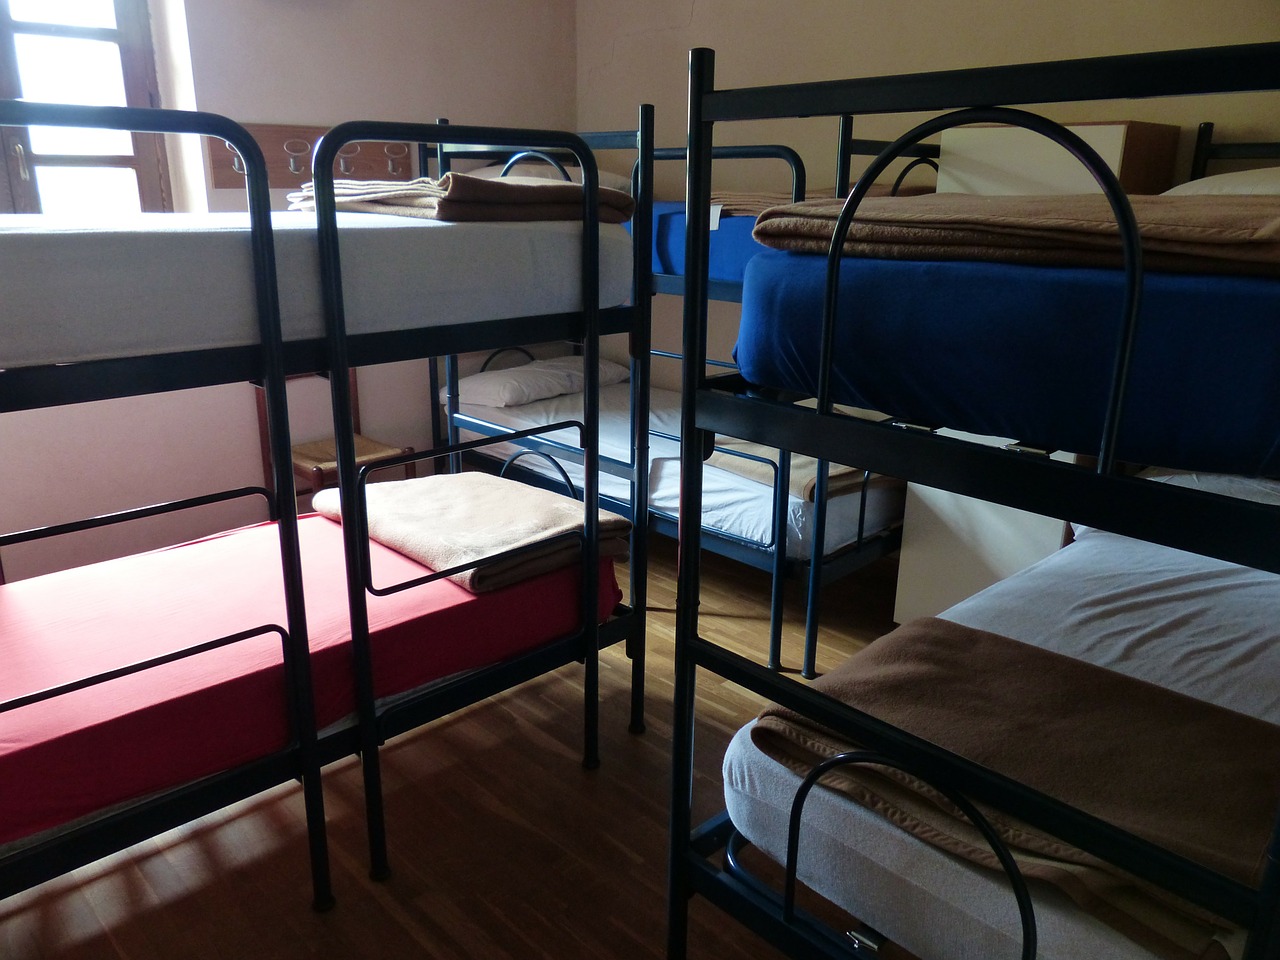 beds youth hostel bunk beds free photo